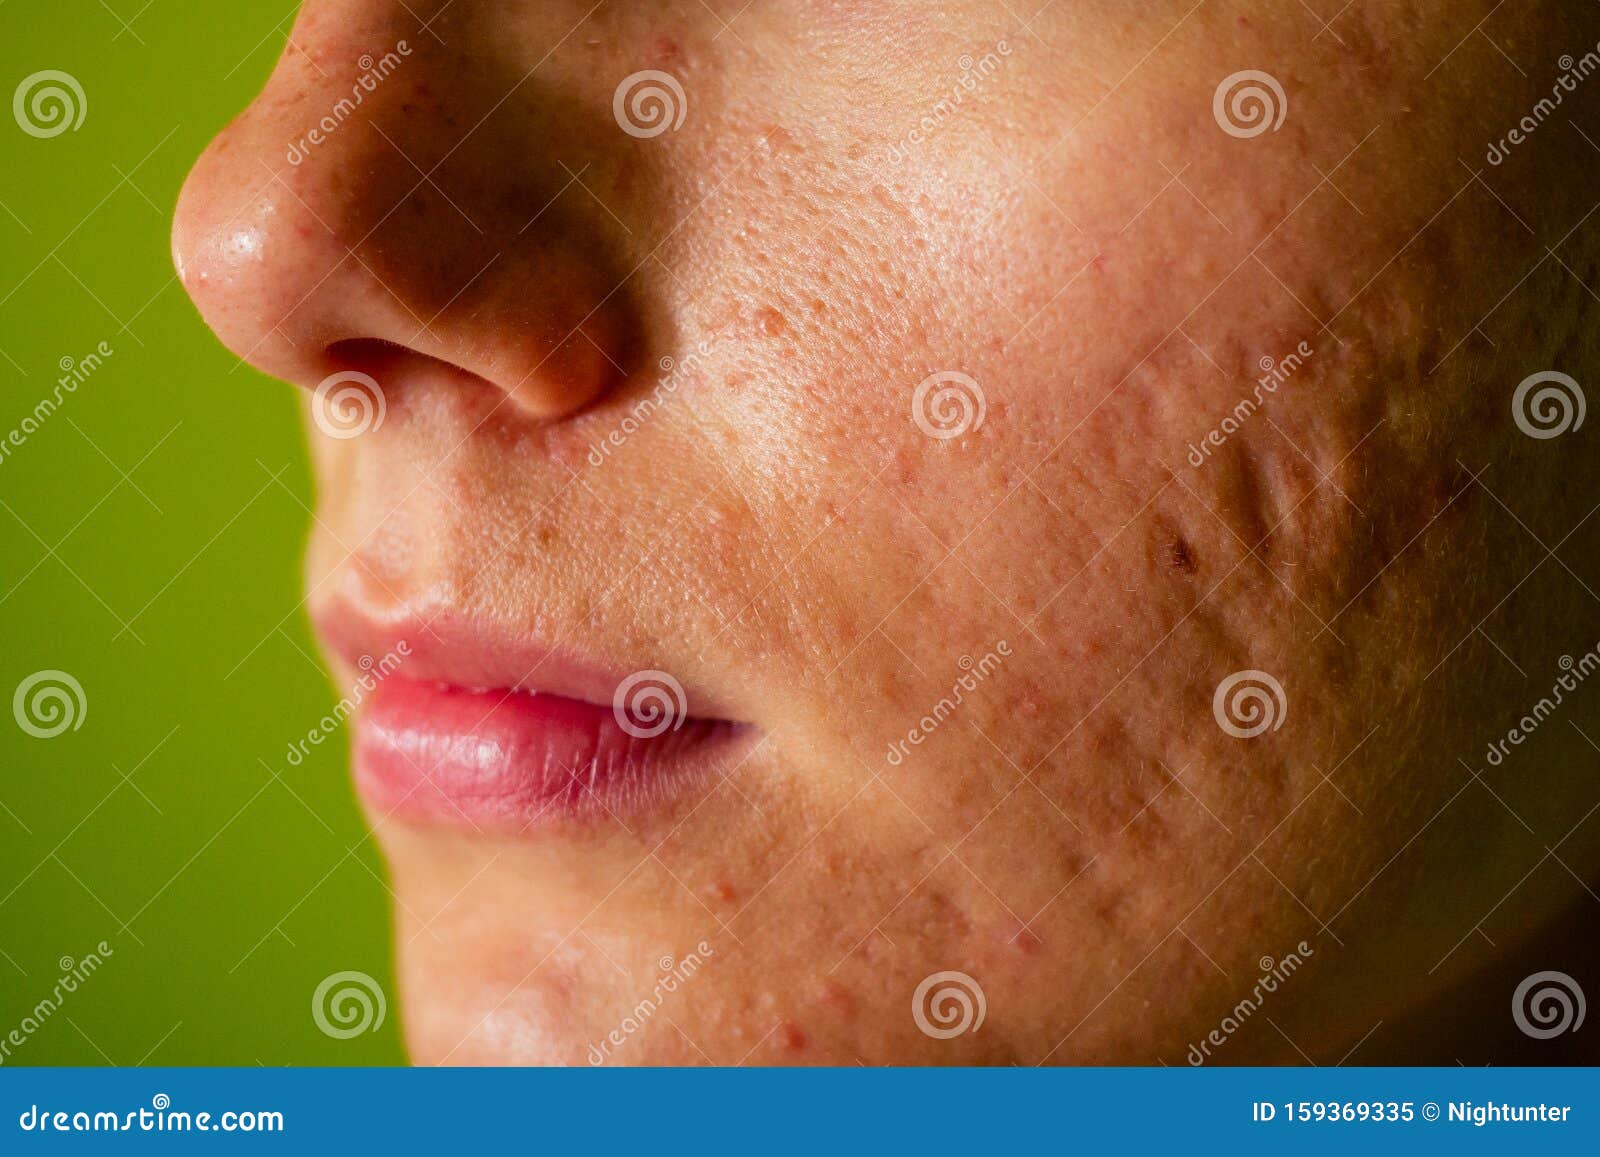 Post-acne, Scars and Festering Pimples on the Face of a Young Woman. Concept of Skin Problems and Harmonic Failure Stock Image - Image of blemishes, overproduction: 159369335